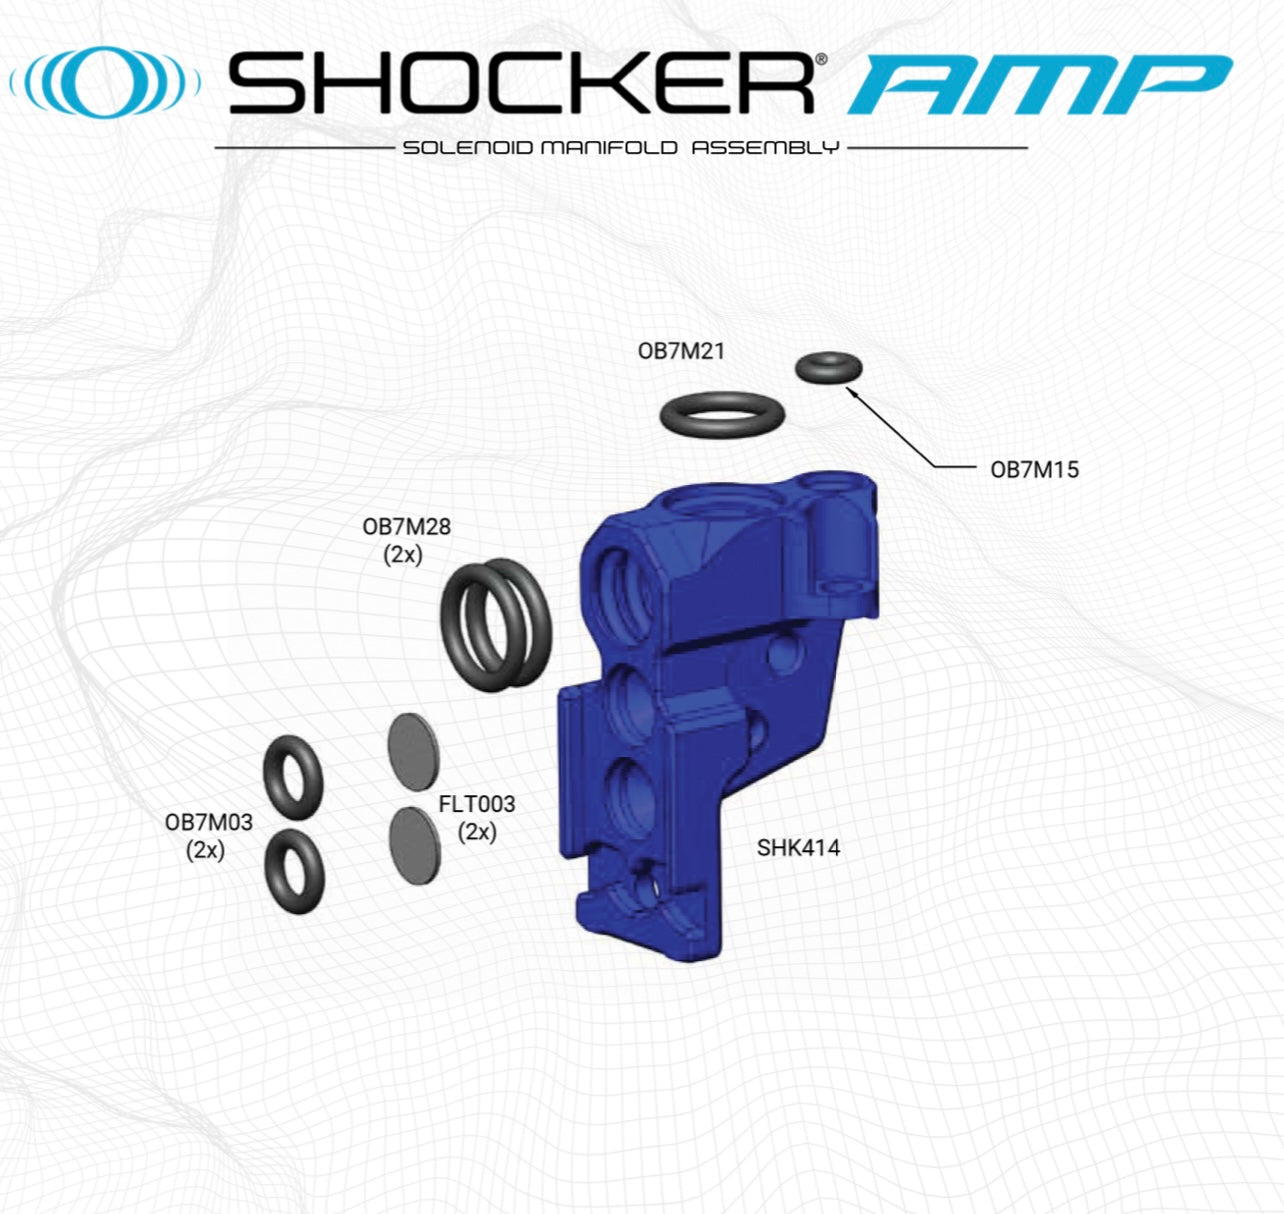 SP Shocker Amp Solenoid Manifold Assembly Parts List - Pick the Part You Need!